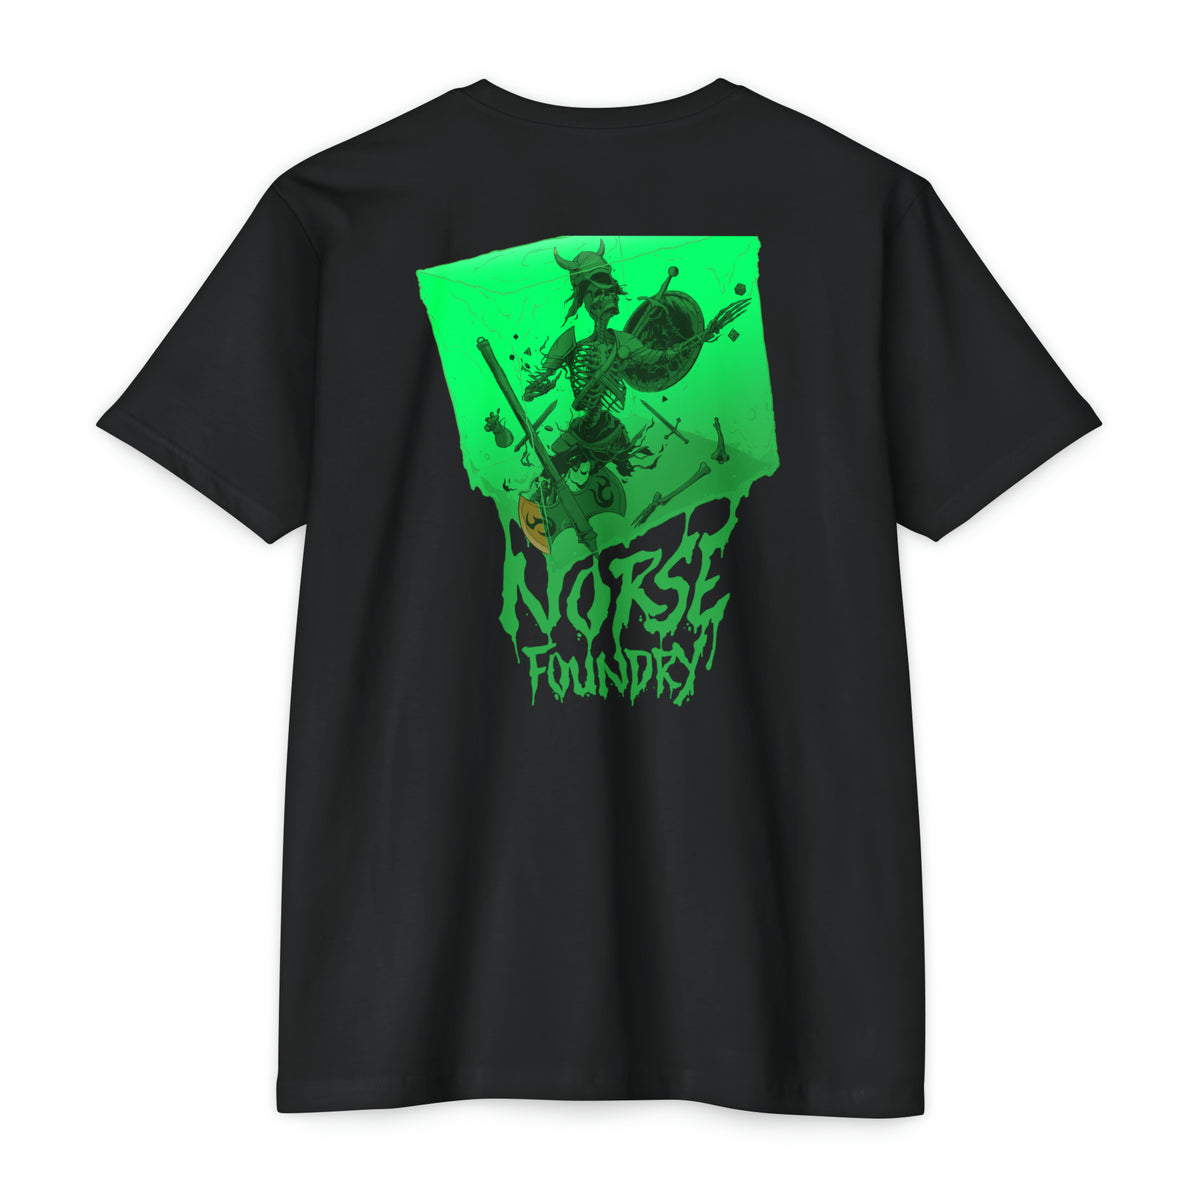 Cube - Norse Foundry T-Shirt